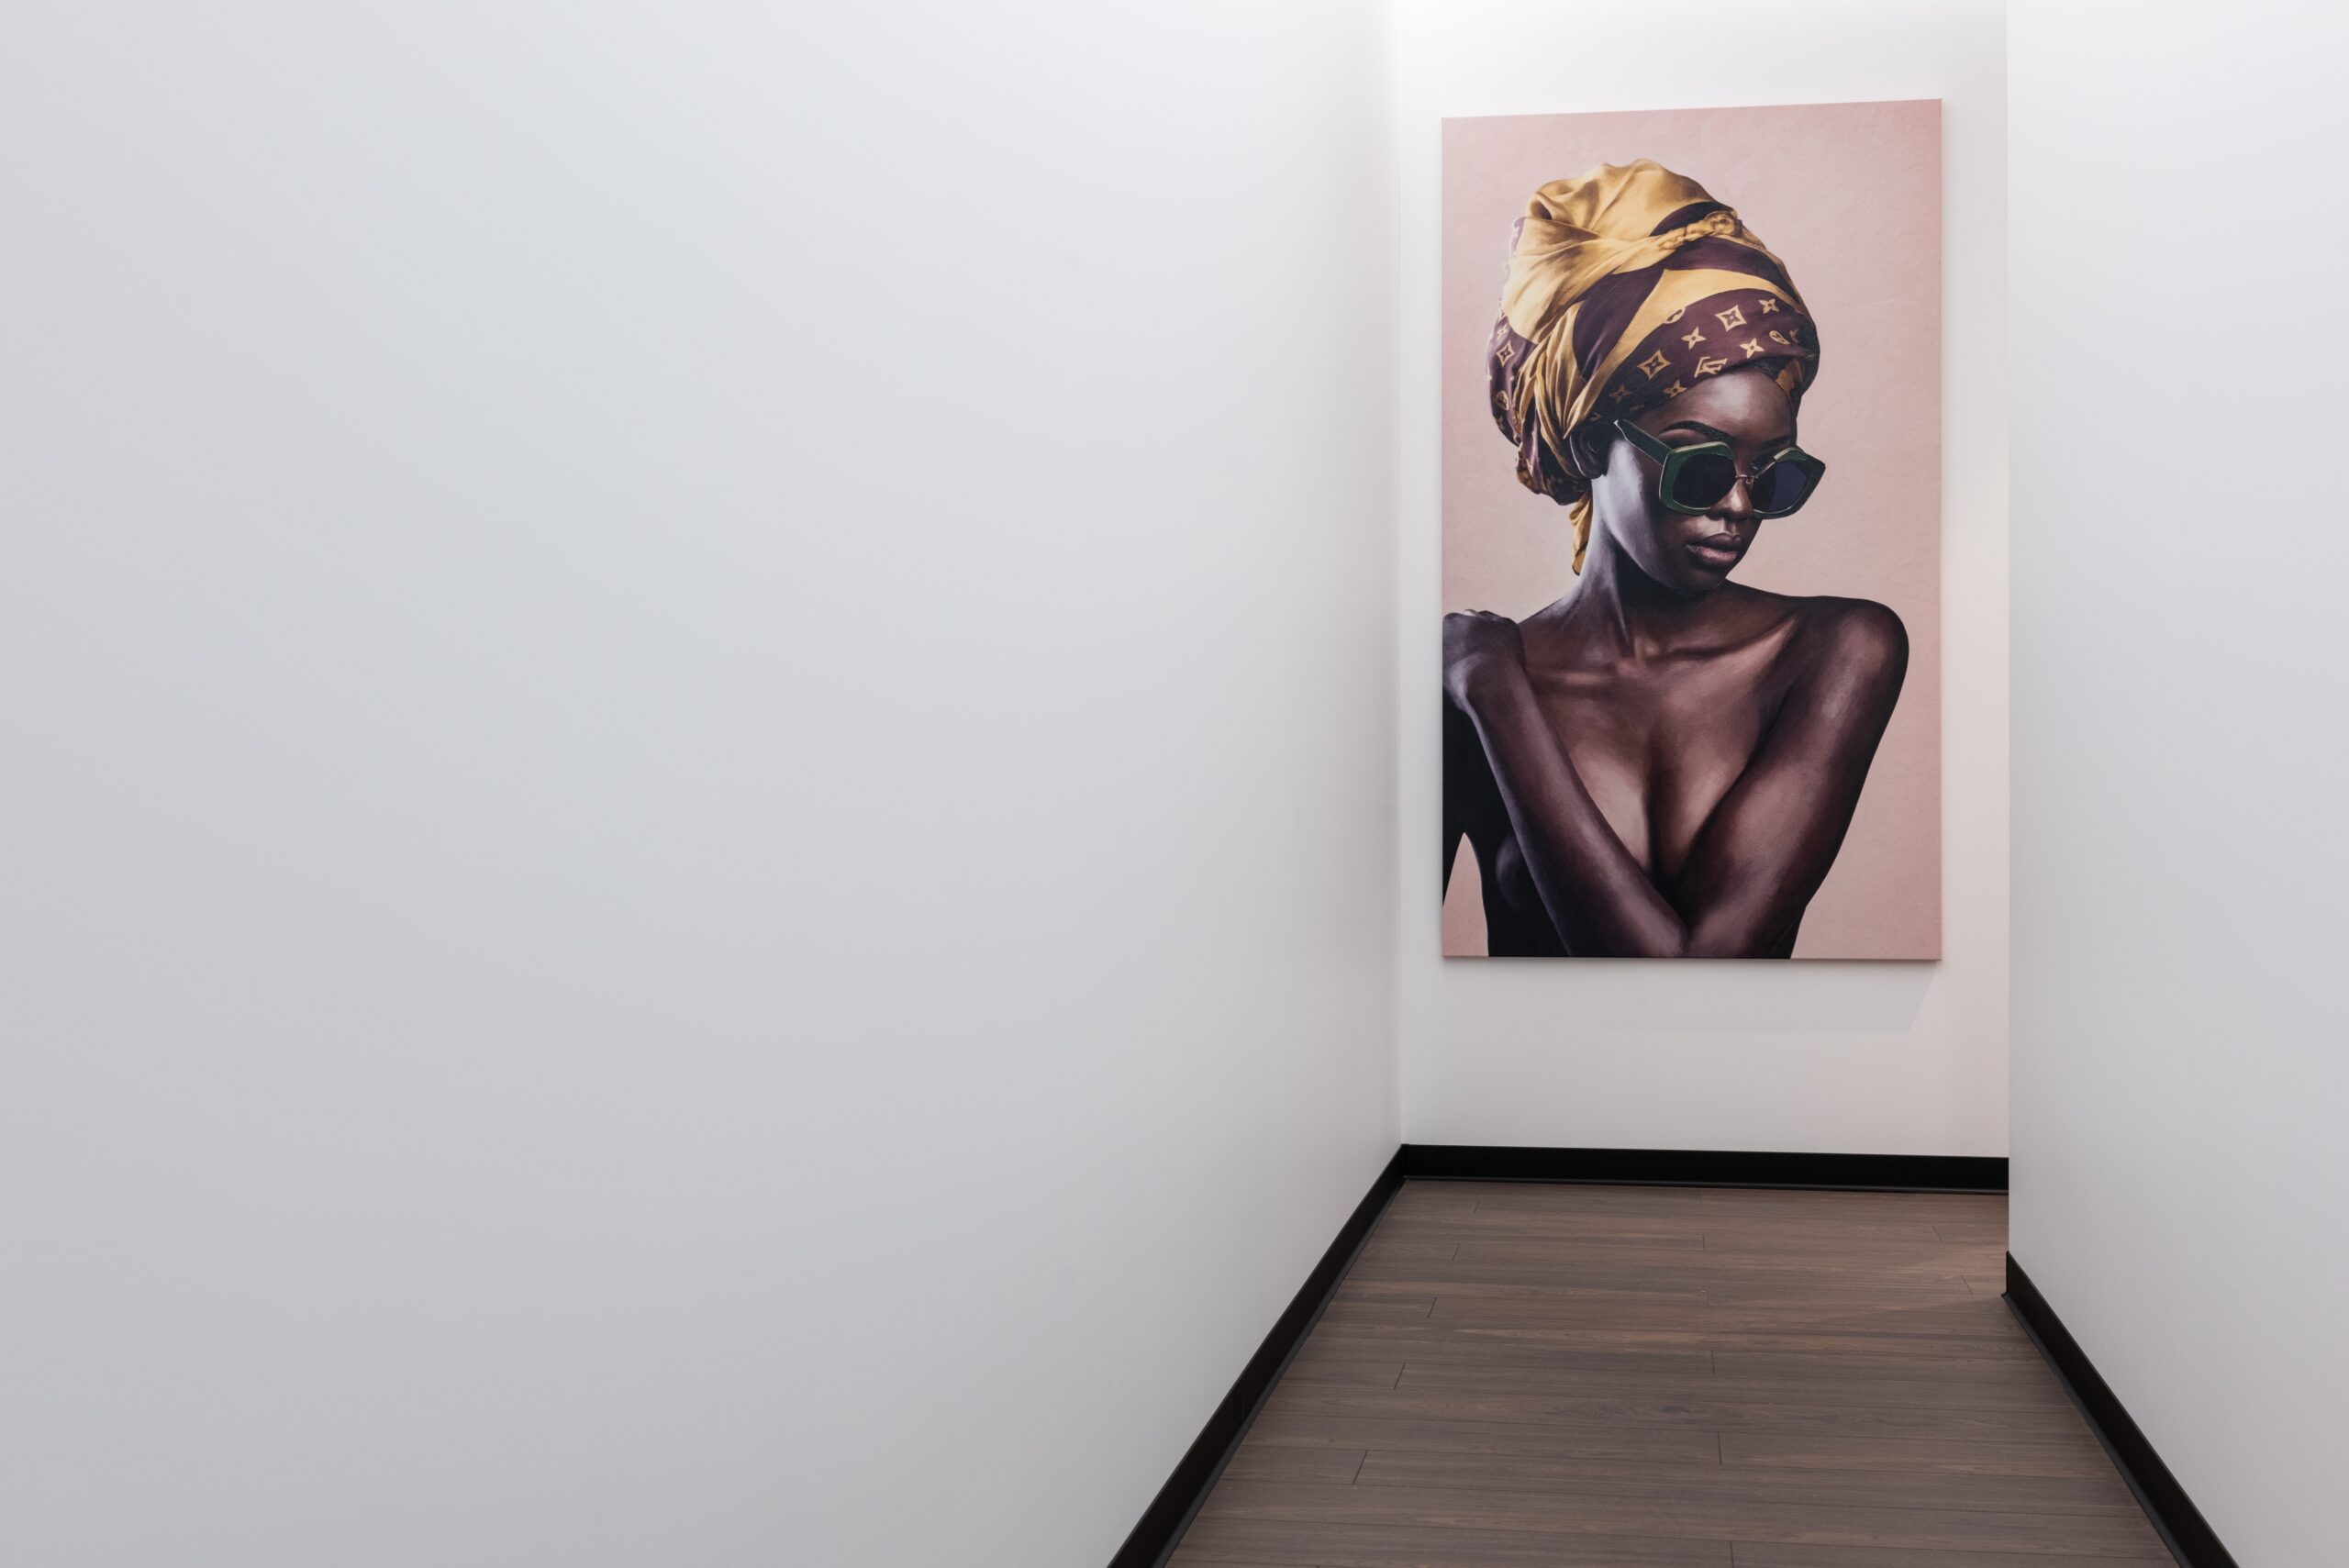 A single painting of a Black woman hanging in a hallway